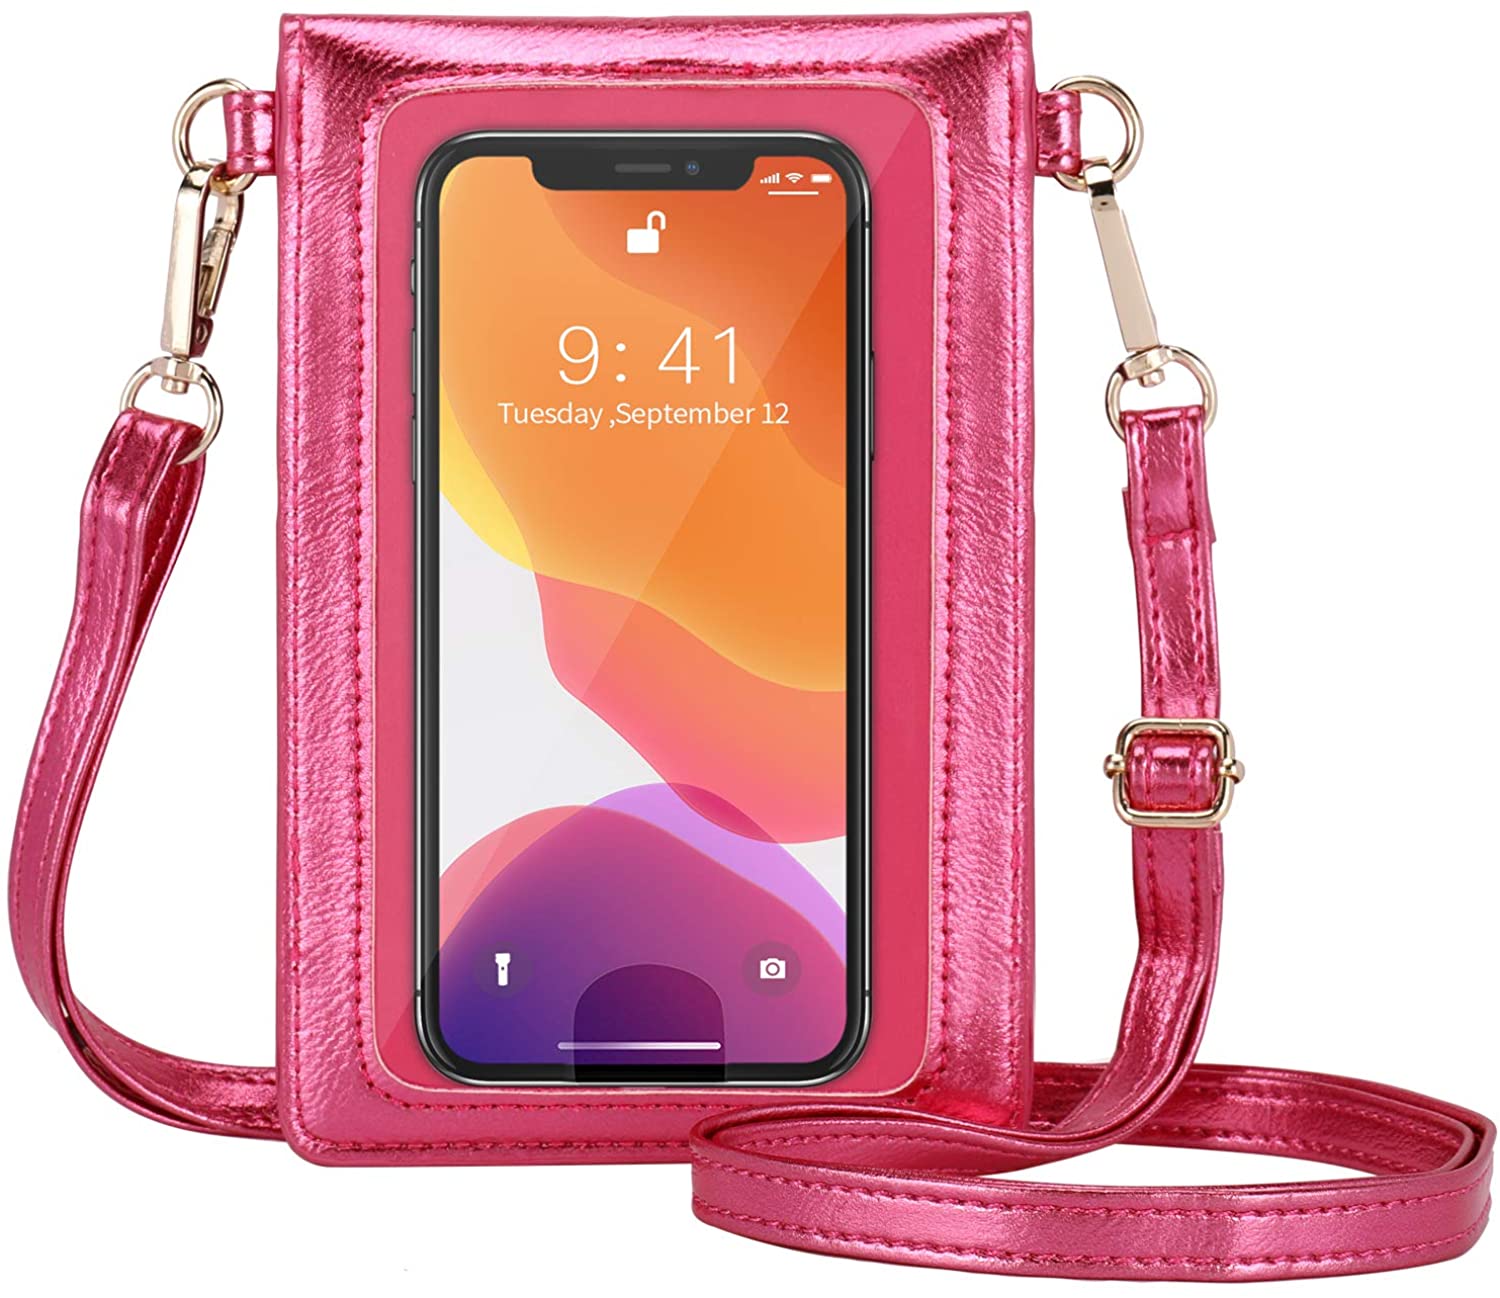 AnsTOP Small Crossbody Cell Phone Purse for Women - Clear Crossbody Bag for Women Mini Phone Pouch Purse